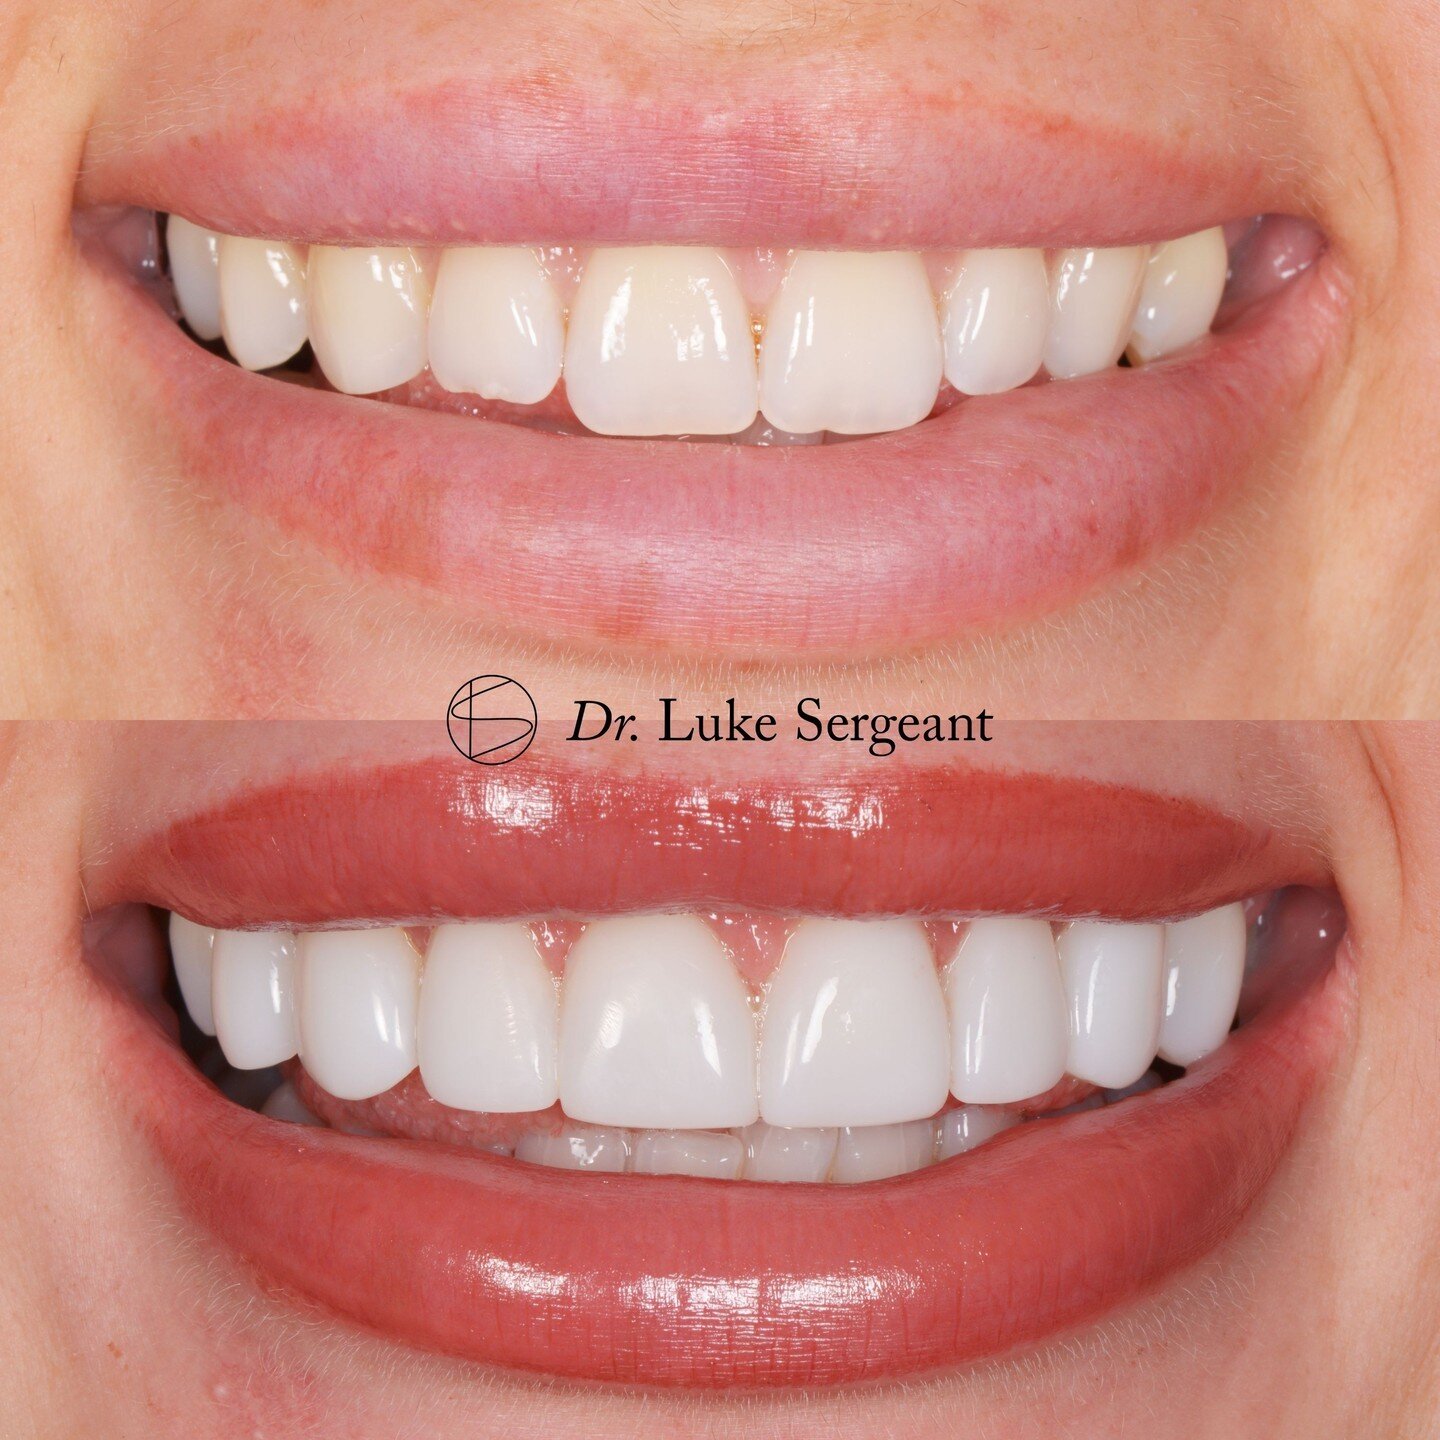 A great composite veneer transformation! Schedule your free smile consultation at Raby Road and let our expert team guide you on your journey to a brighter, healthier smile! ✨

#smilejourney #smiletransformation #wirral #dental #compositeveneers